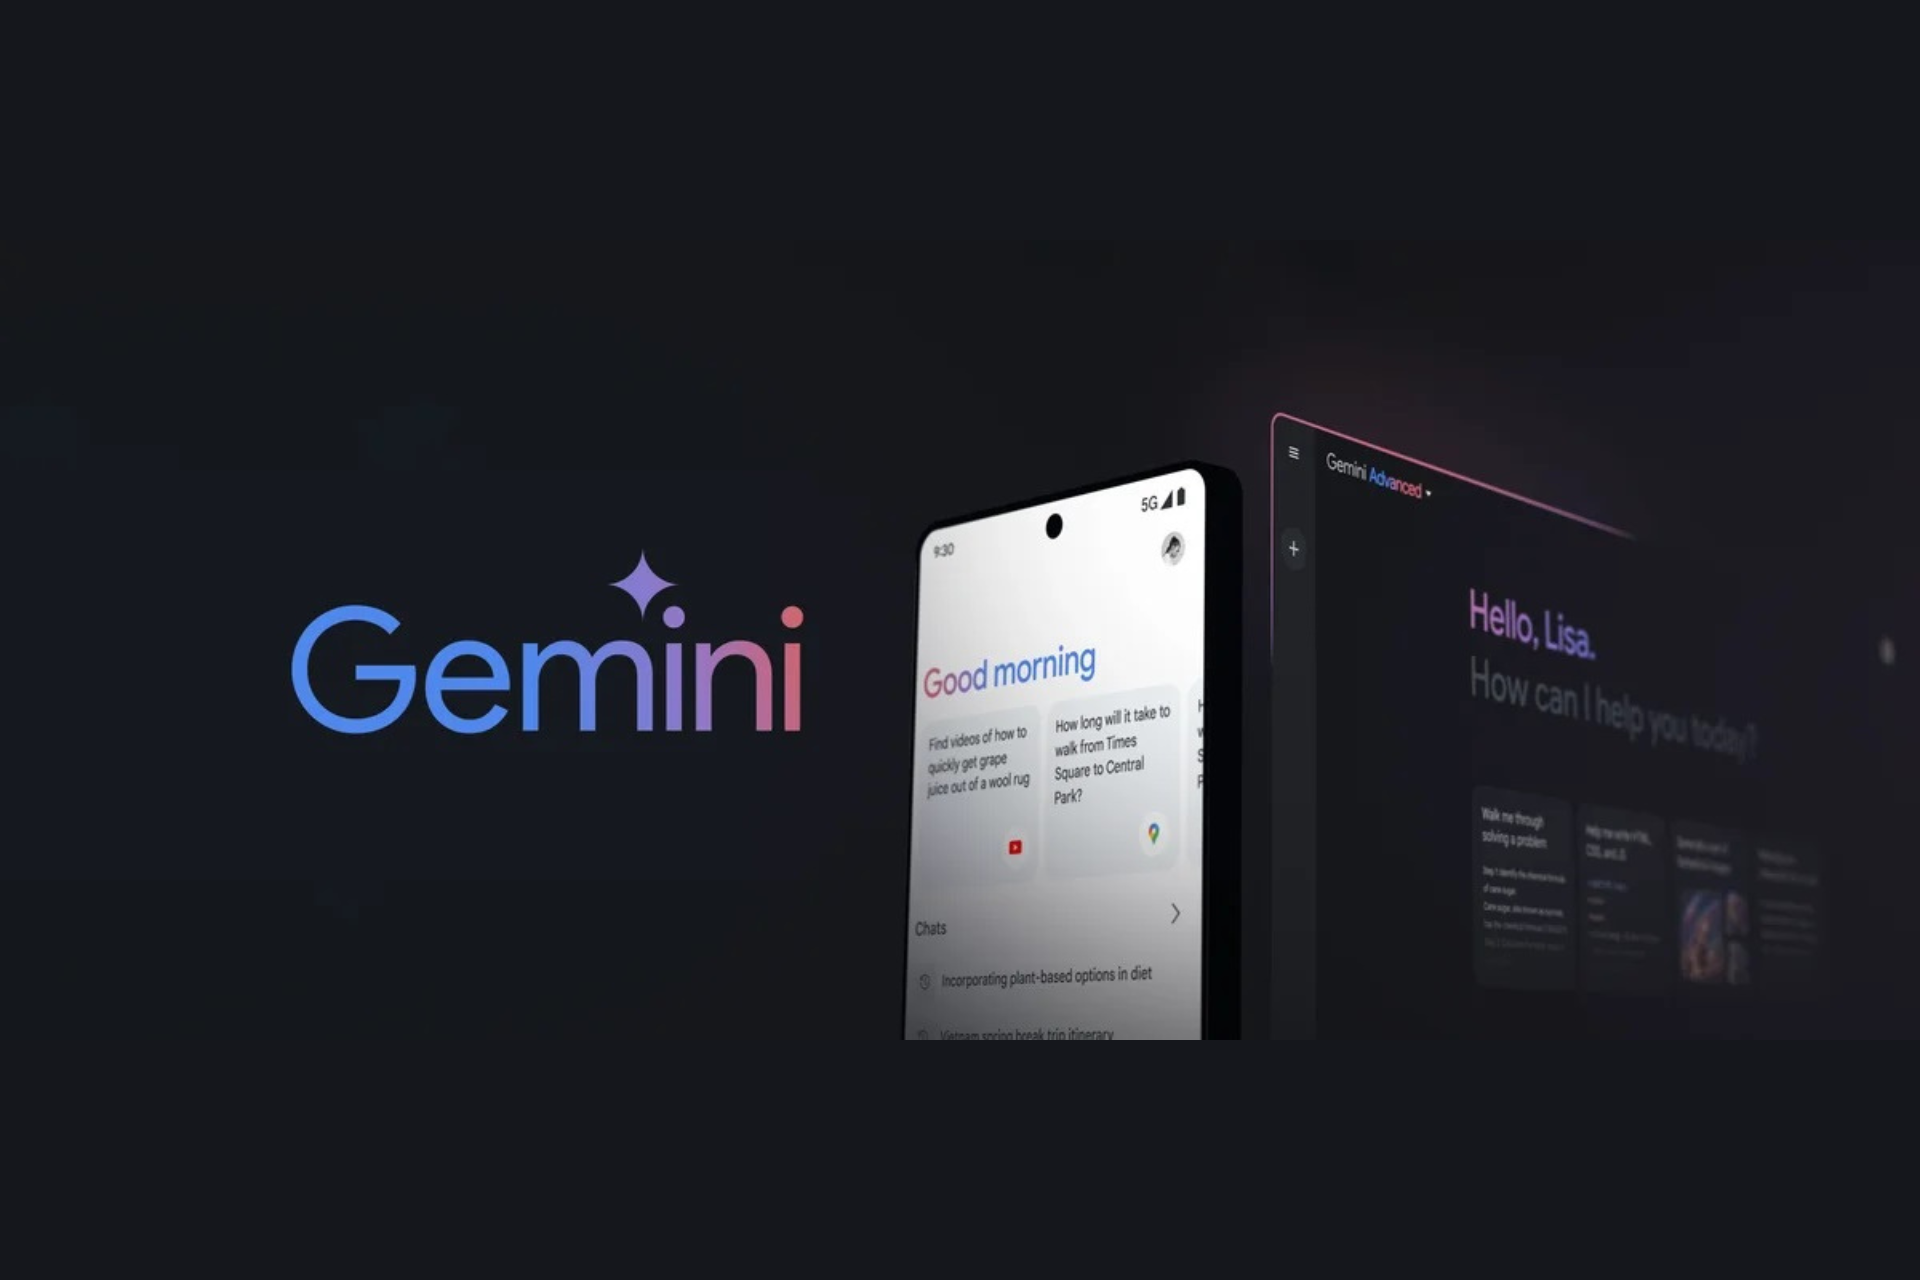 Google replaces Bard with Gemini